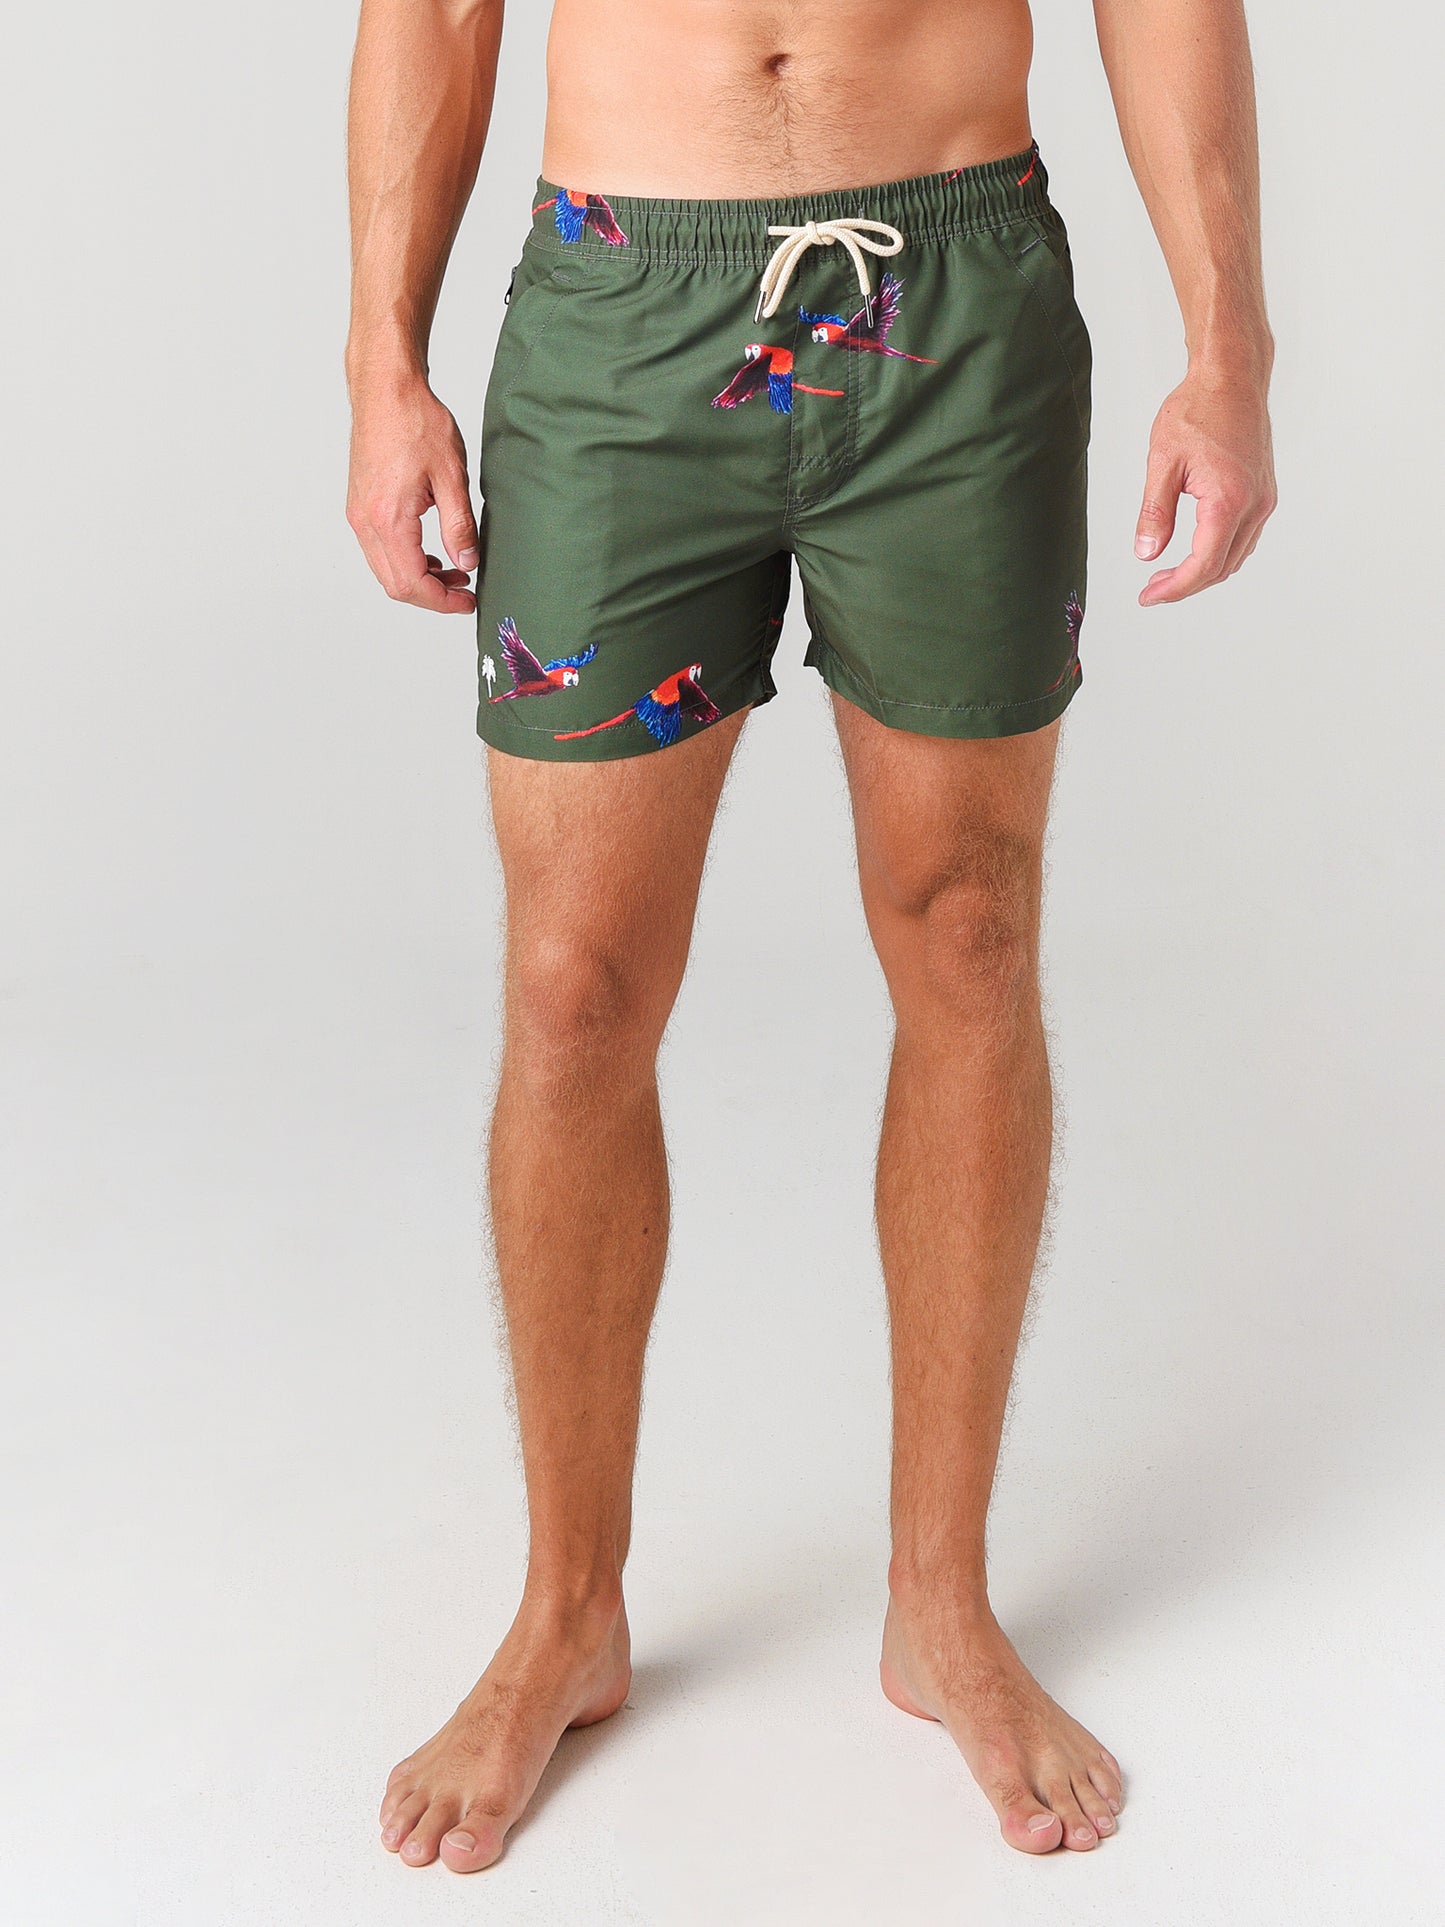 OAS Men's Army And Fly Swim Trunks